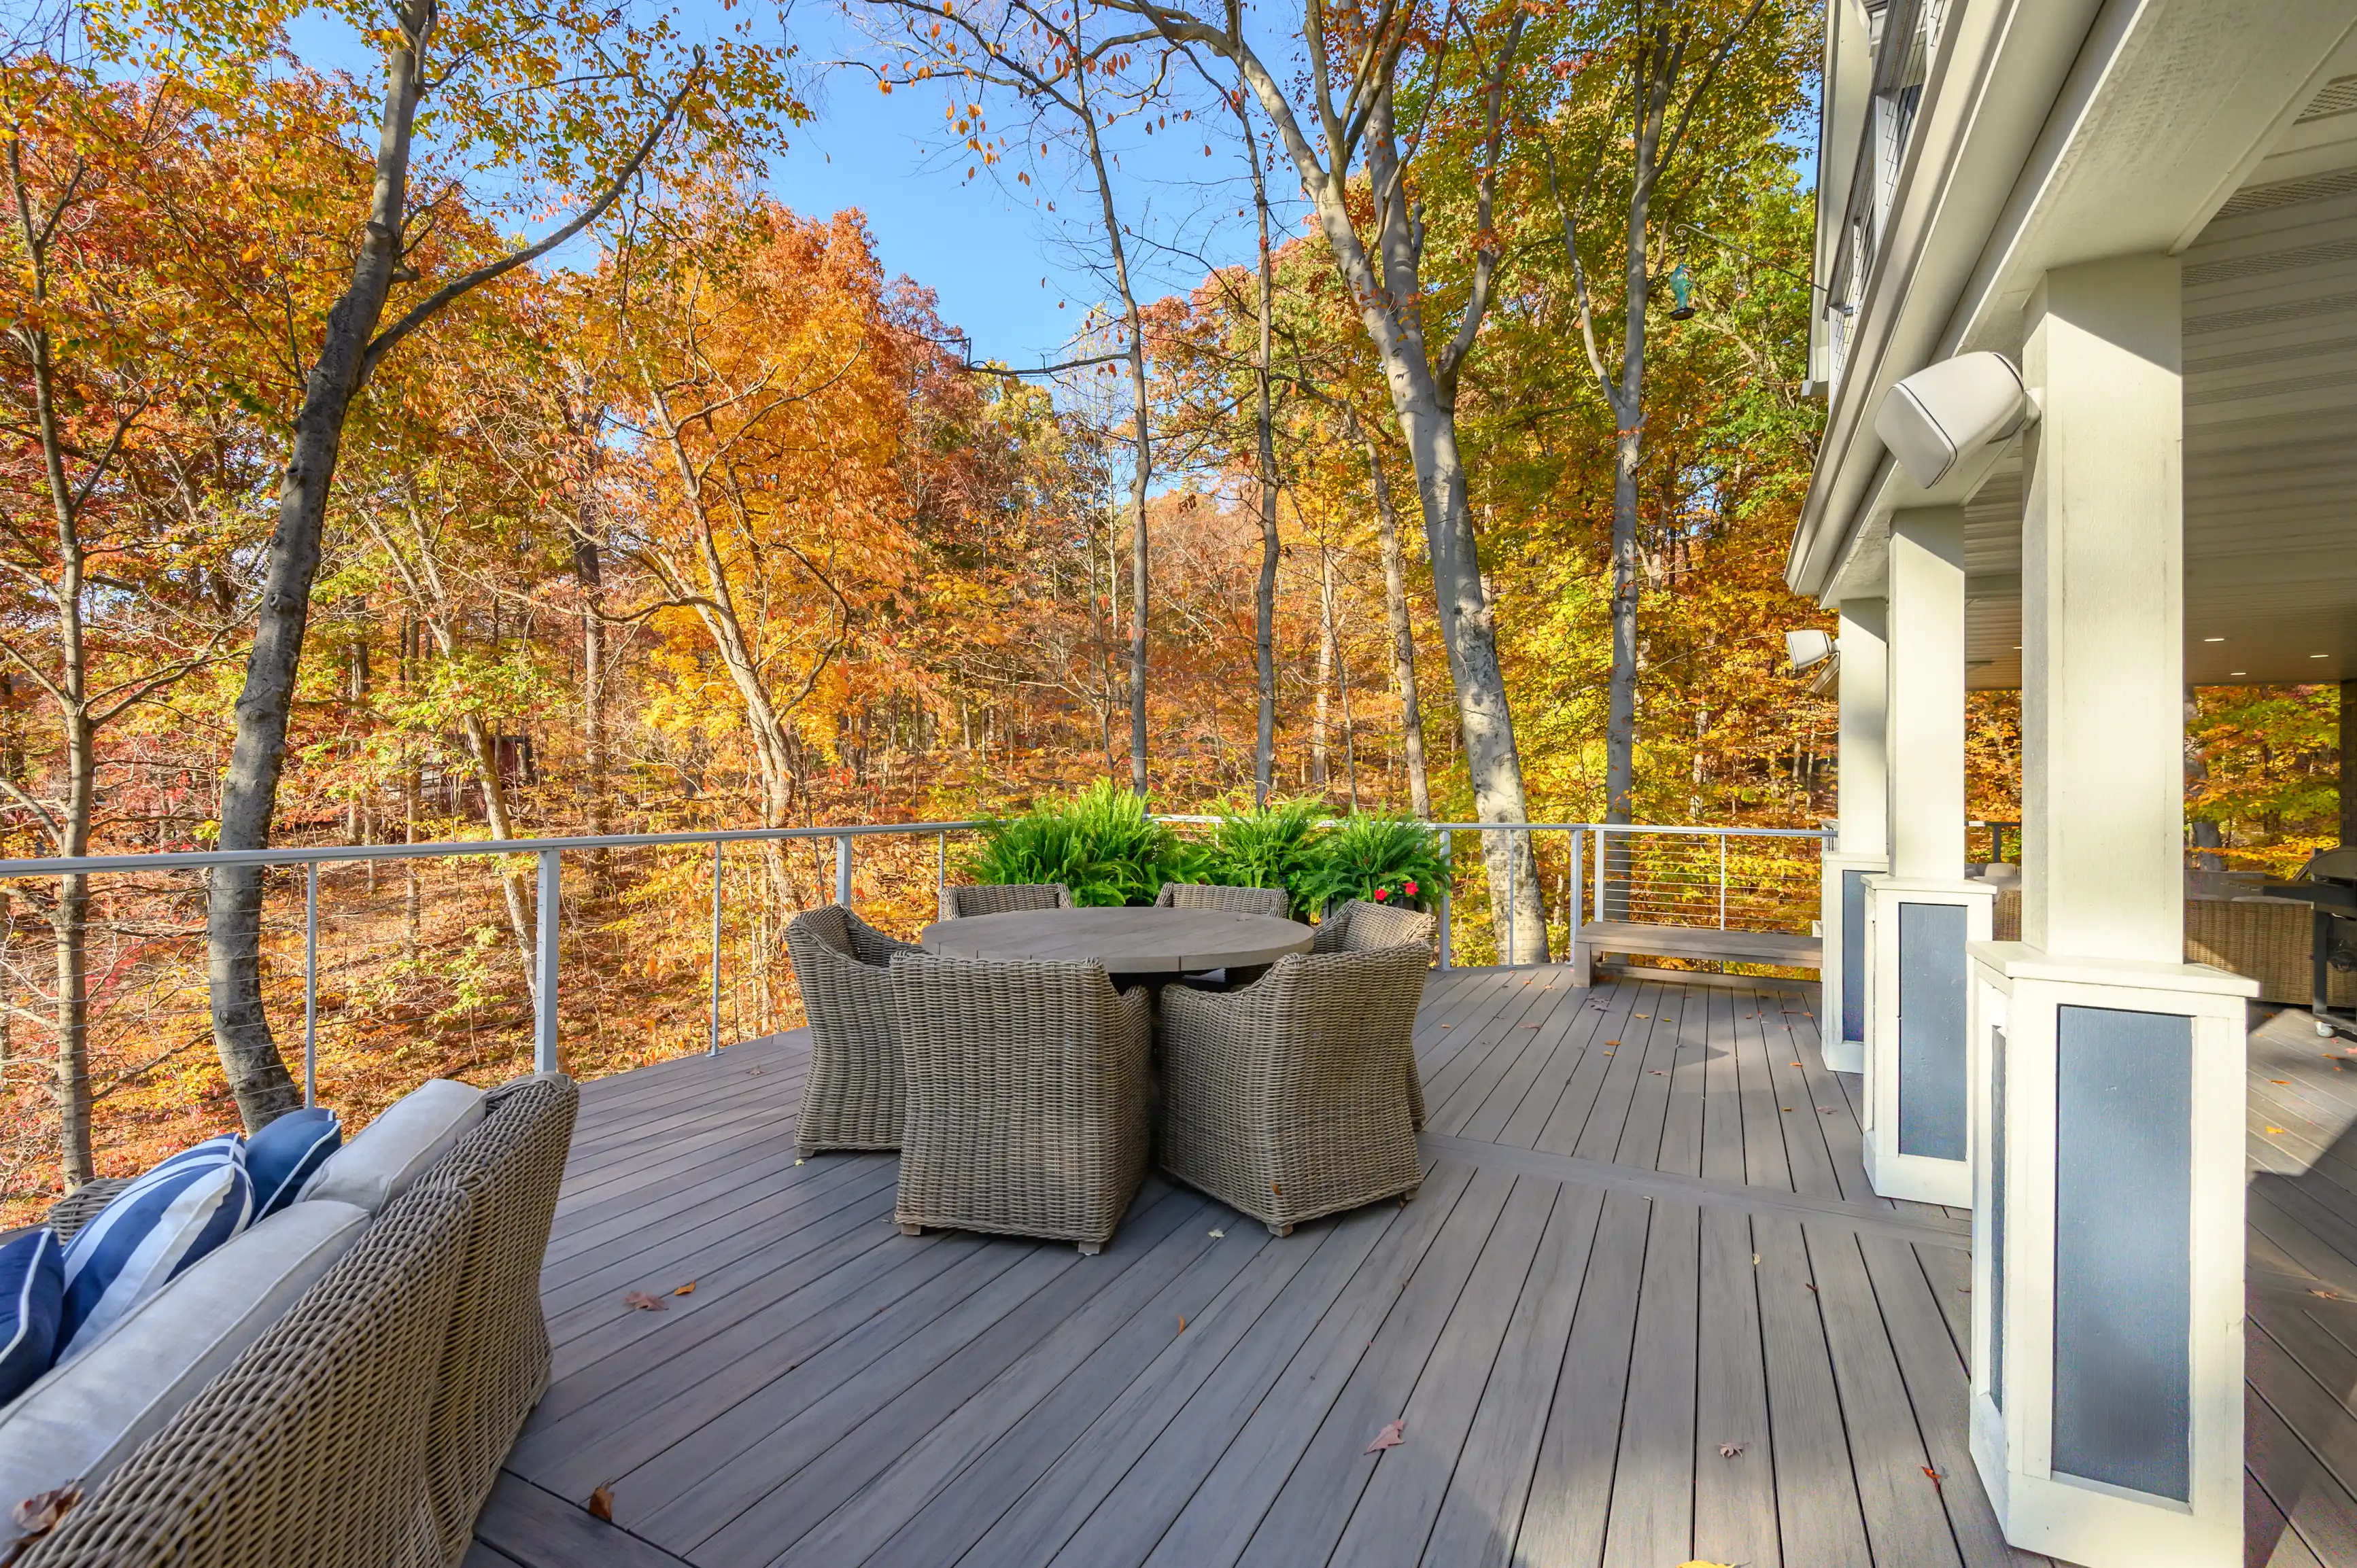 A spacious wooden deck with outdoor furniture overlooking a forest with autumn-colored leaves.